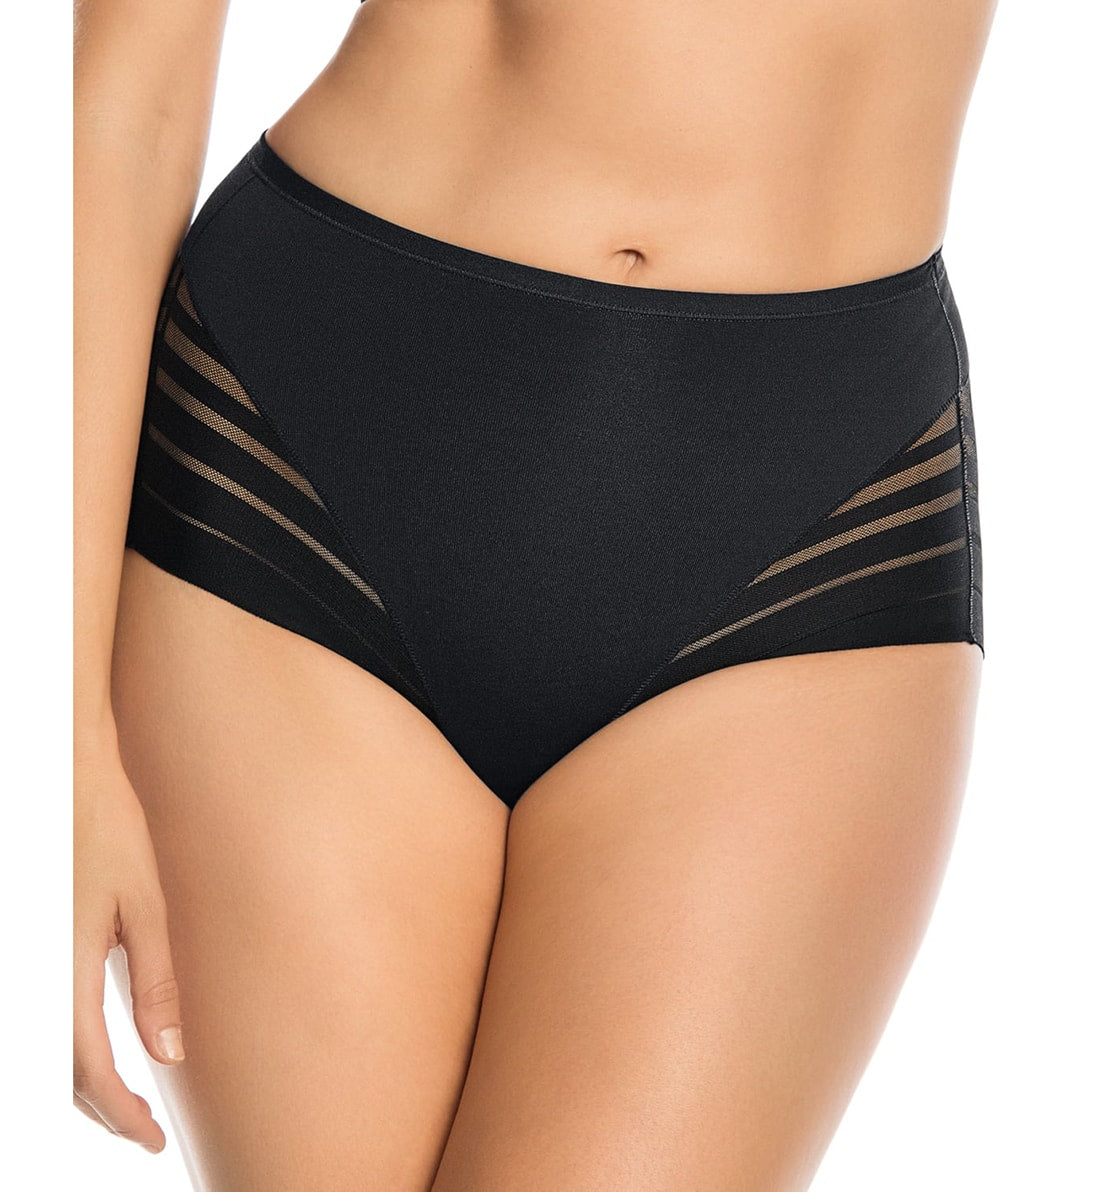 Leonisa Undetectable Comfy Compression Classic Panty (012903),Small,Black - Black,Small